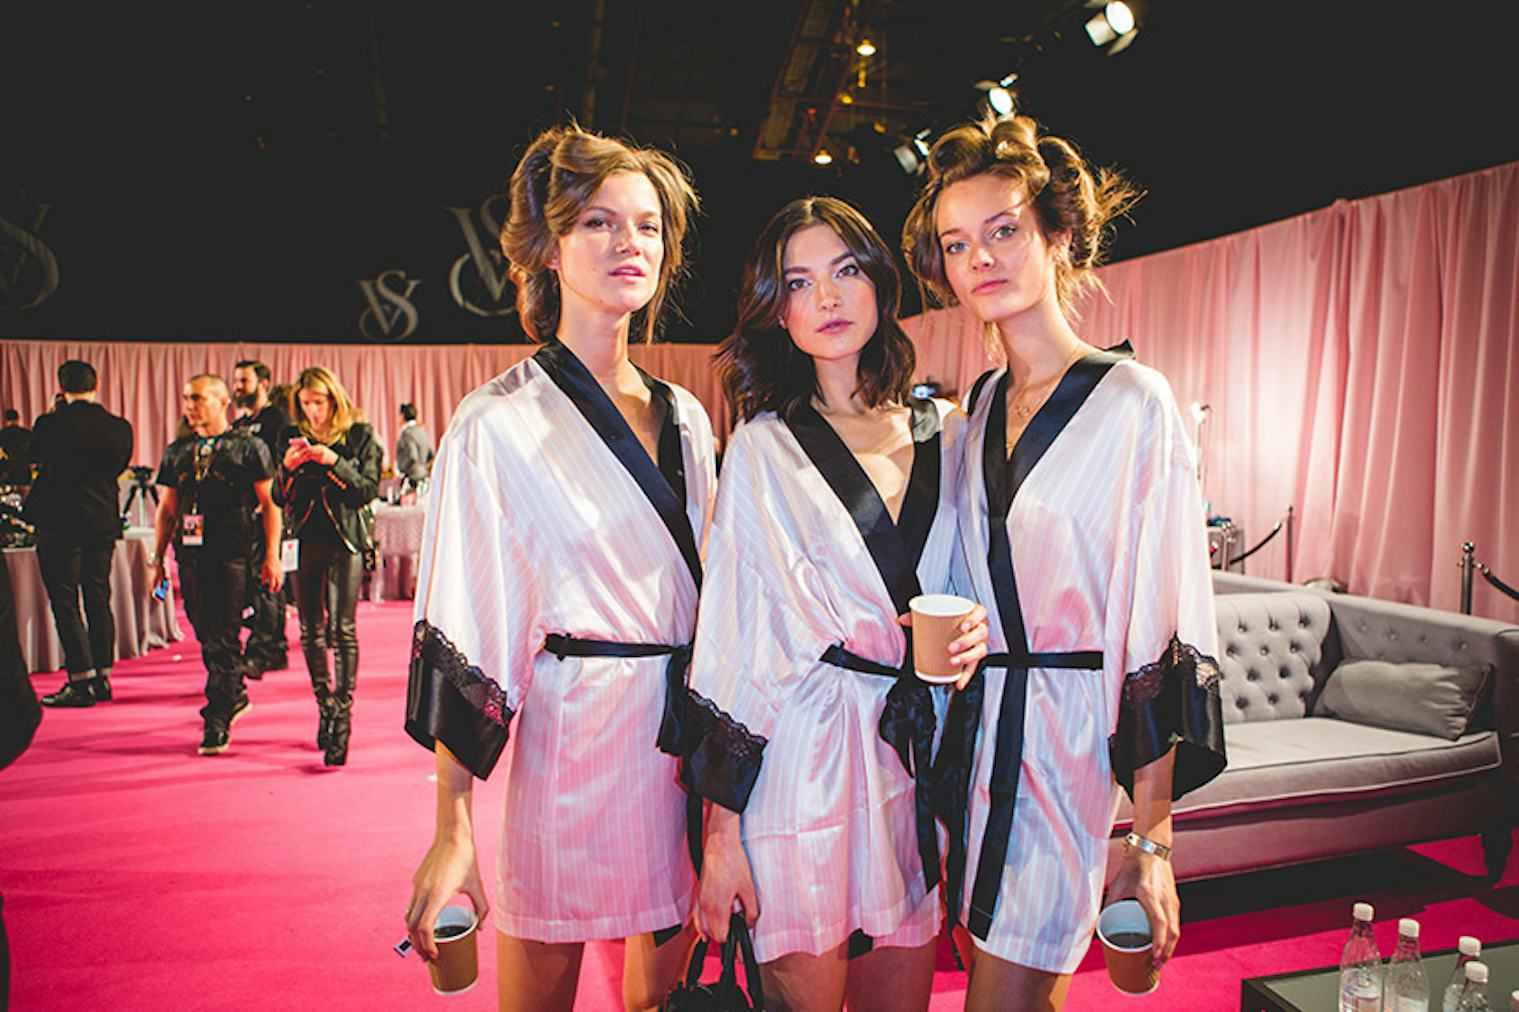 22 Exclusive Behind The Scenes Photos From The Victoria’s Secret Fashion Show